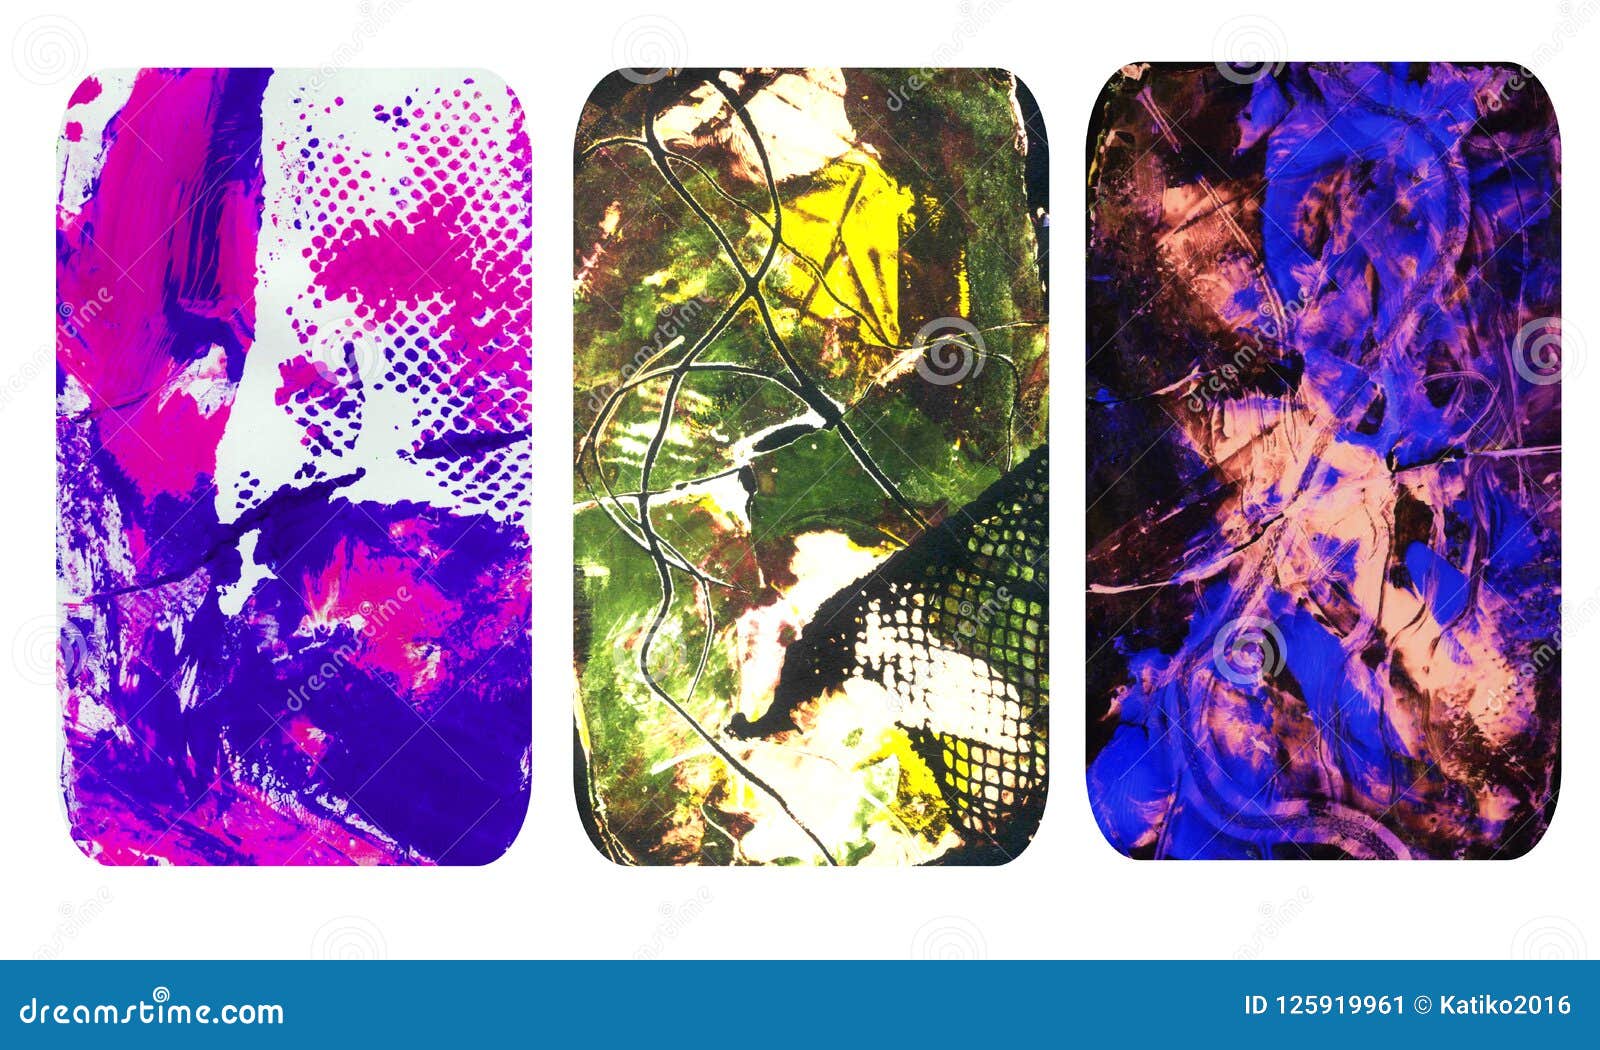 set of bright blurred abstract textures. colorful handmade backgrounds with imprints, stains, scuffed areas.